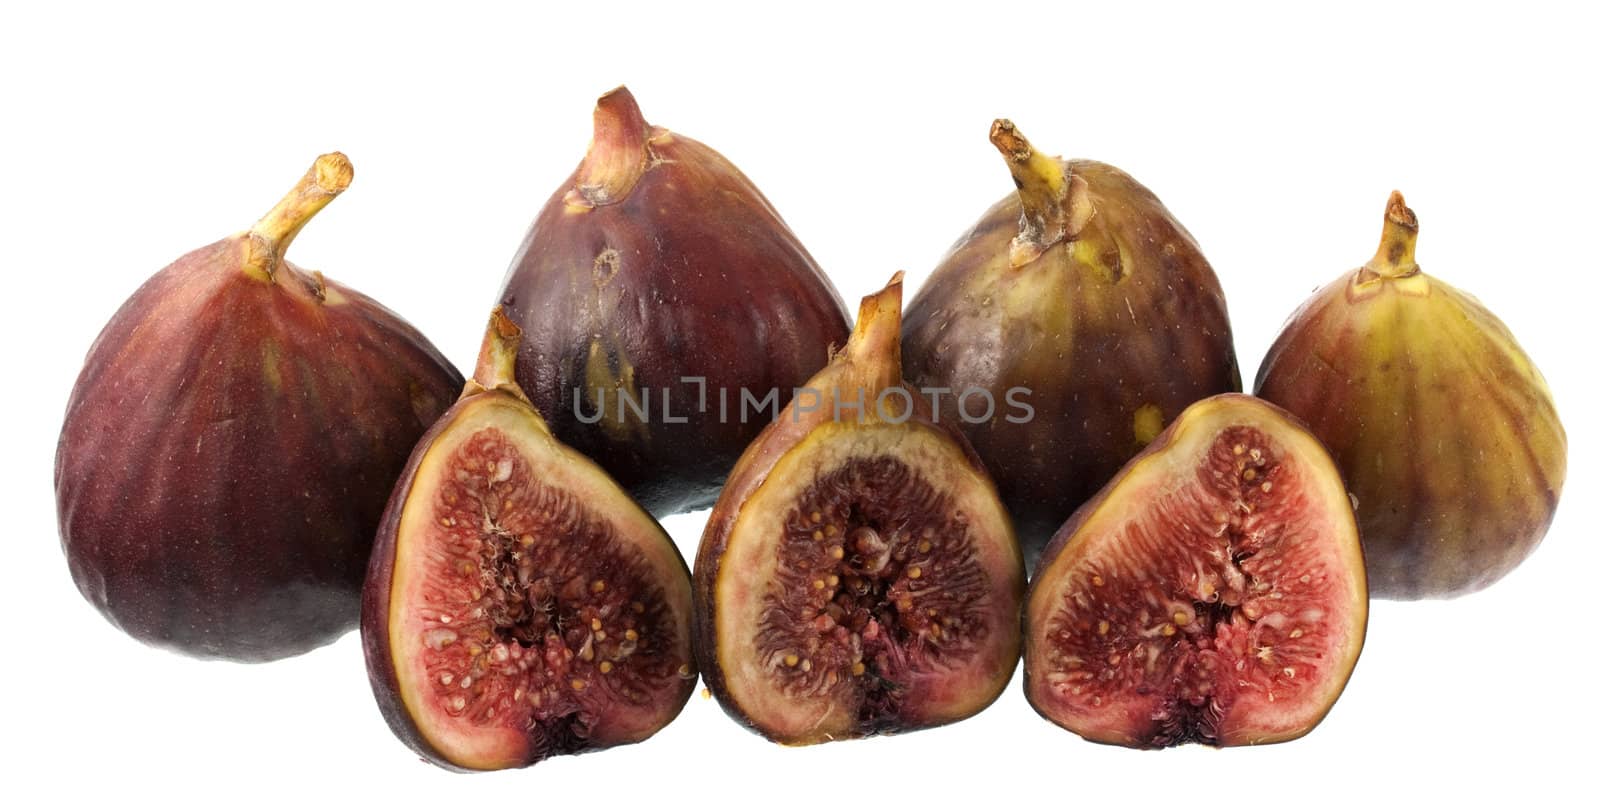 fresh Turkish figs isolated on white, whole fruits and cross sections